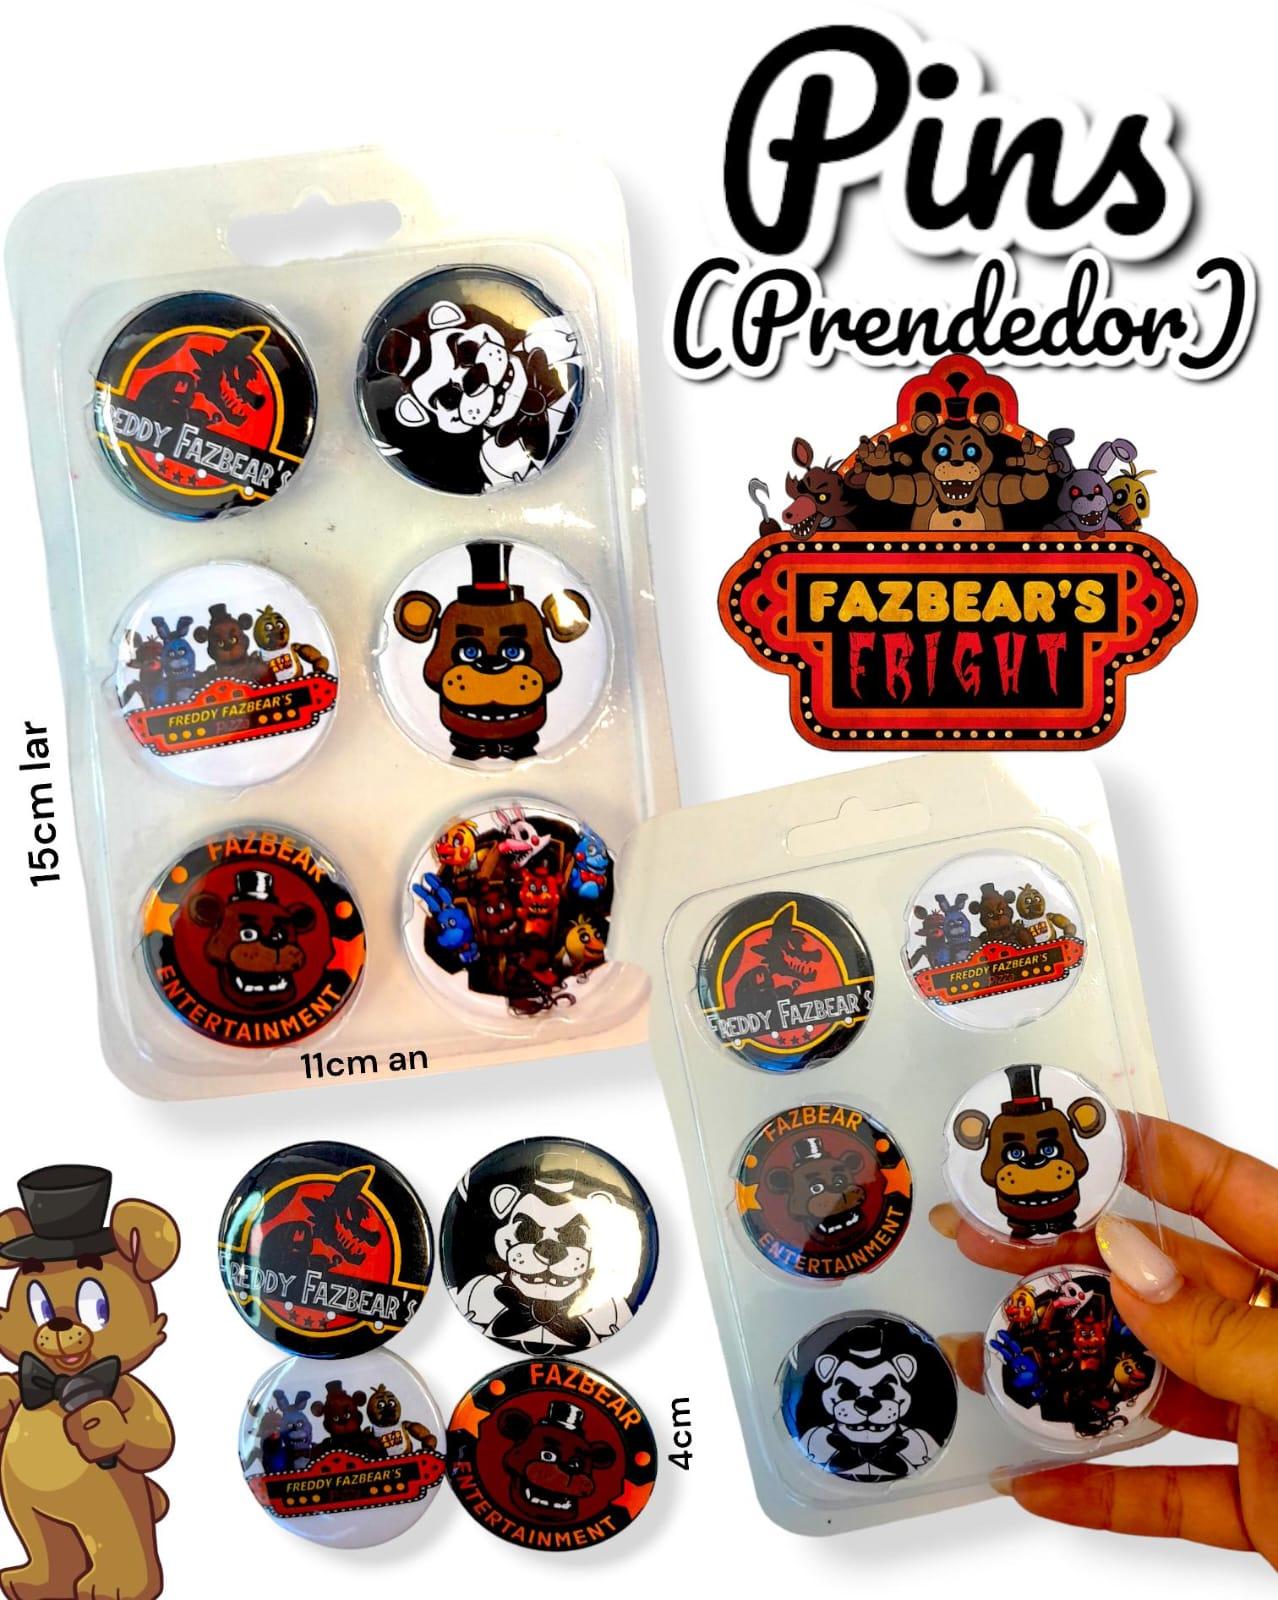 Pins (Prendedor) five nights at freddy's